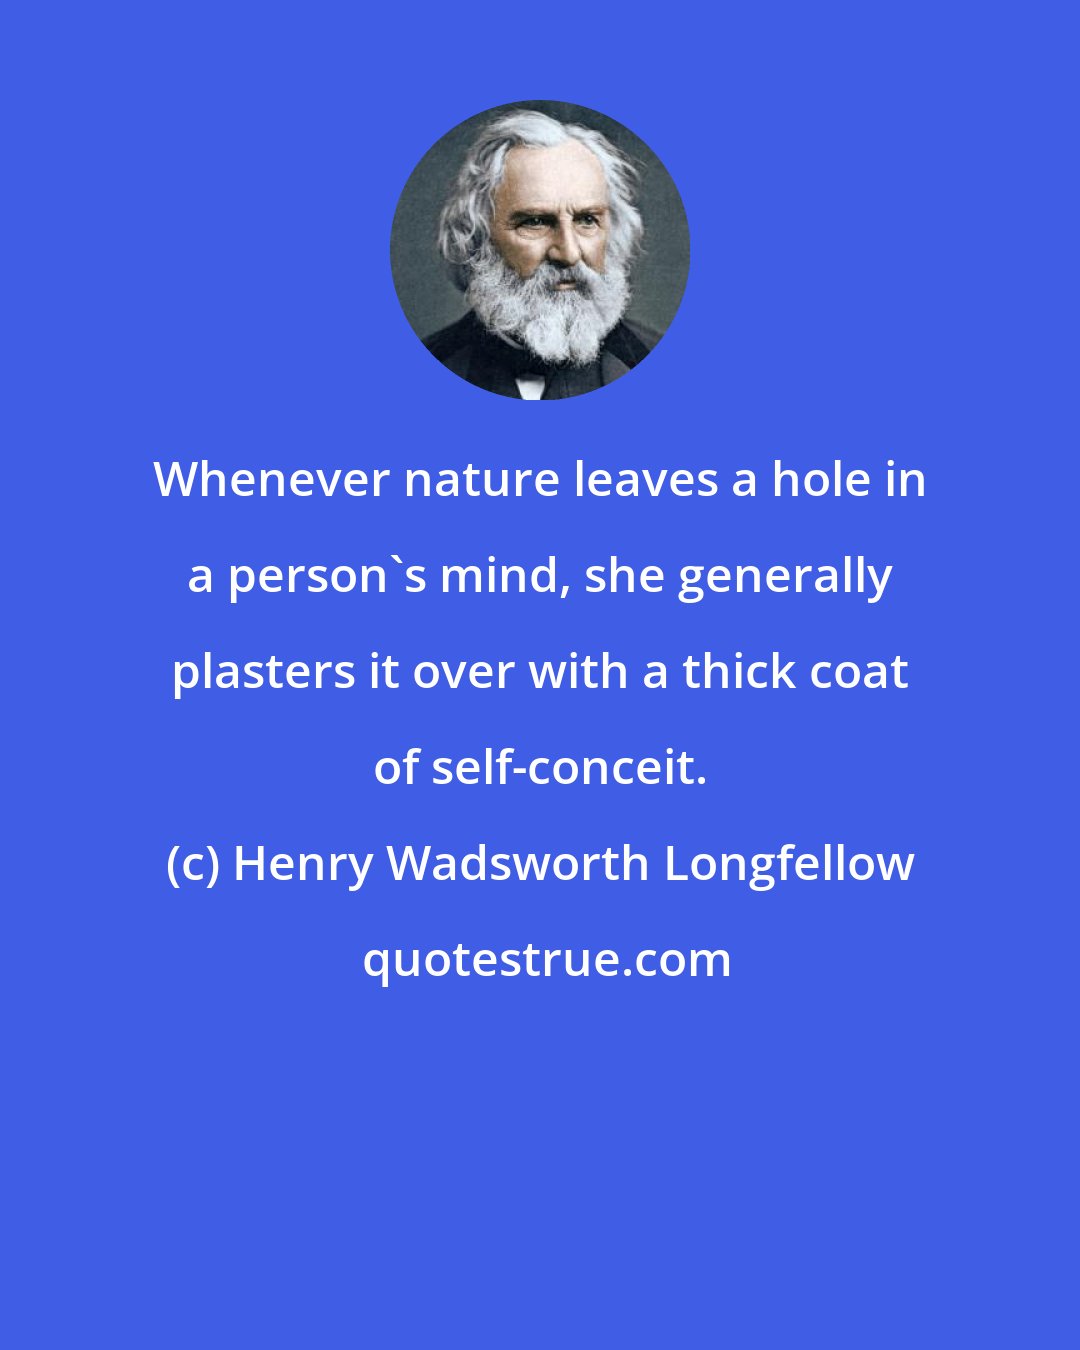 Henry Wadsworth Longfellow: Whenever nature leaves a hole in a person's mind, she generally plasters it over with a thick coat of self-conceit.